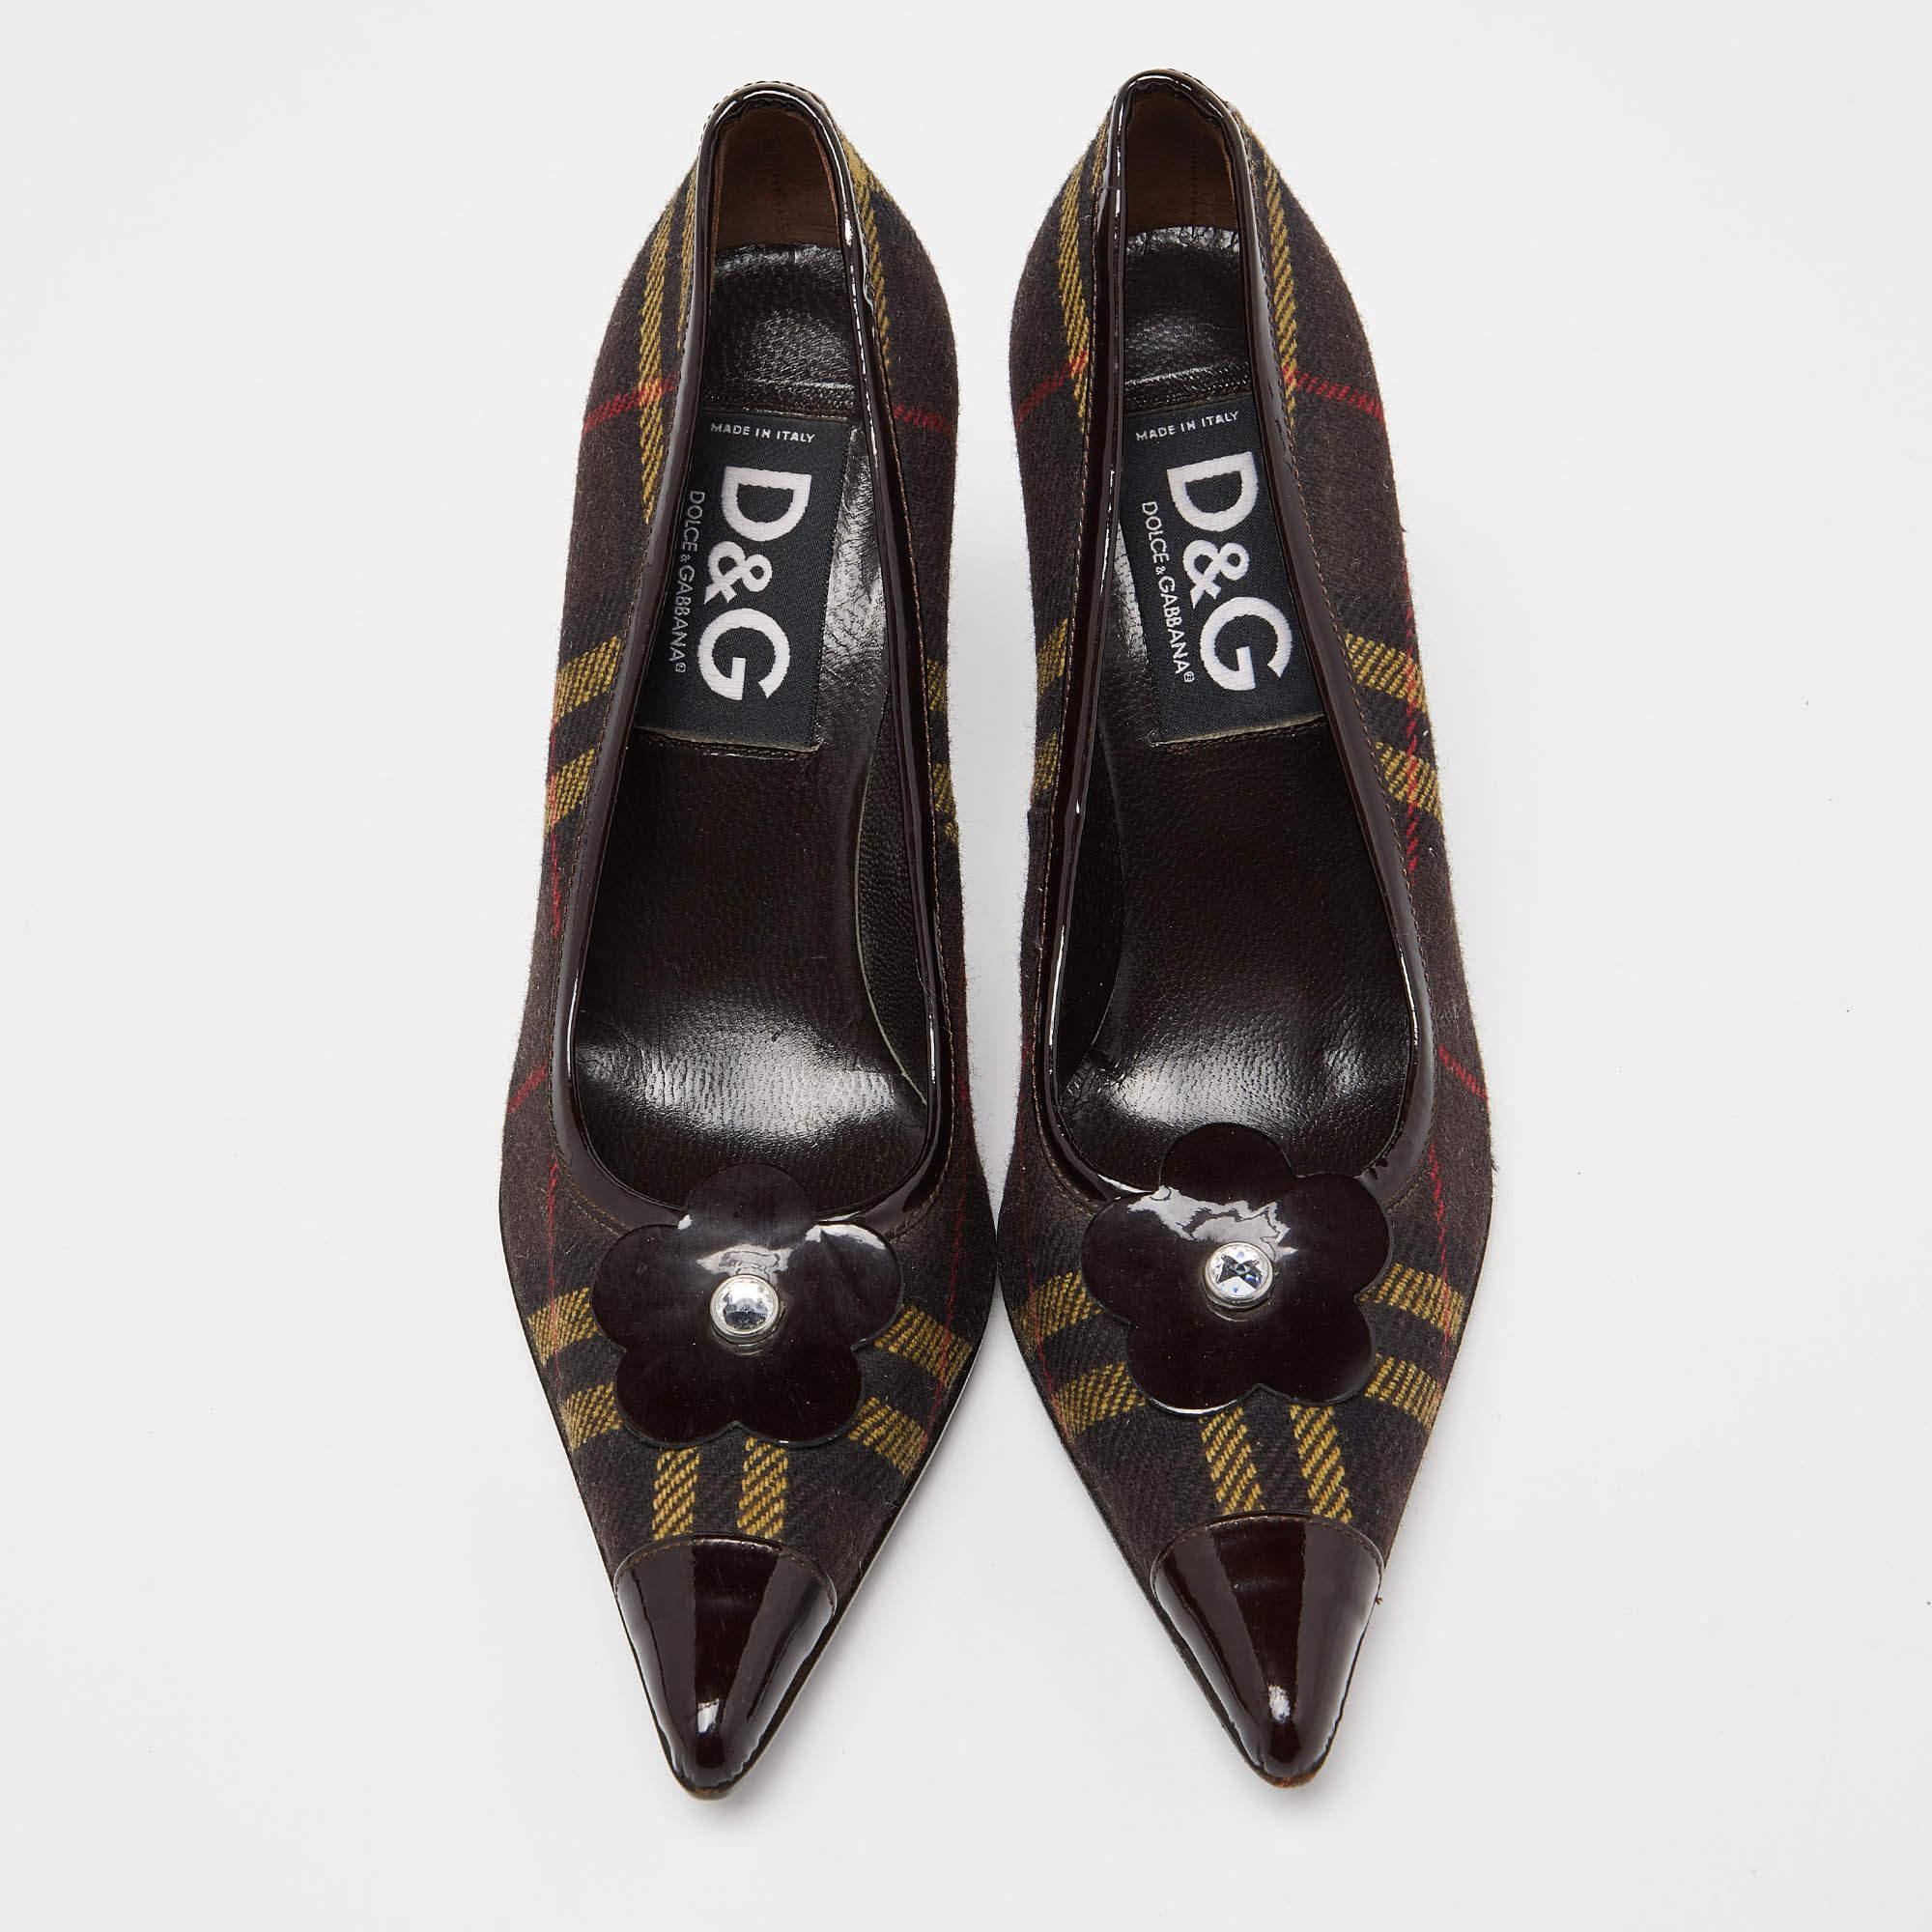 Make a statement with these D&G pumps for women. Impeccably crafted, these chic heels offer both fashion and comfort, elevating your look with each graceful step.

